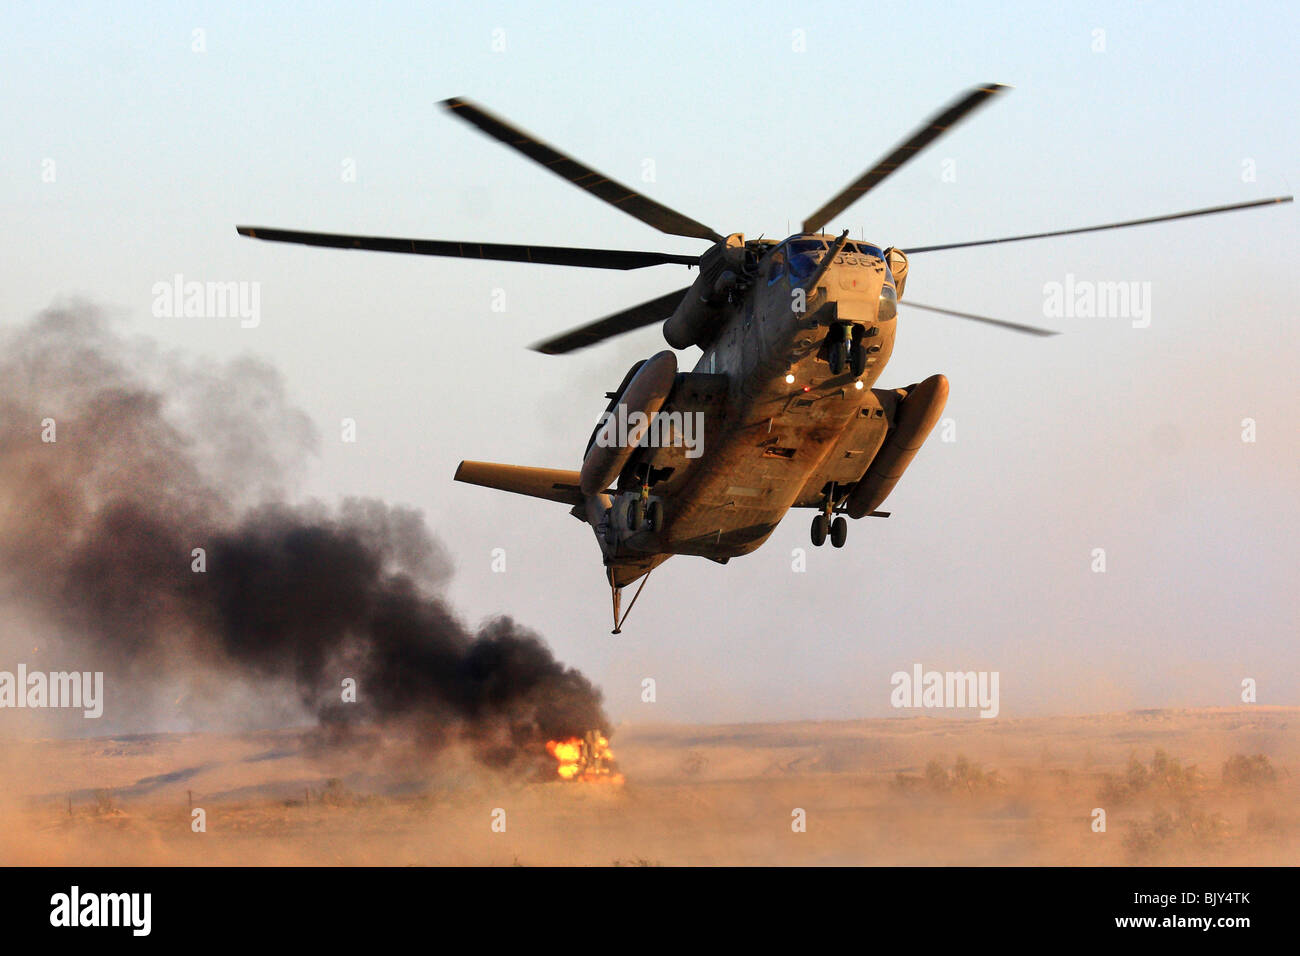 Israeli Air force Sikorsky CH-53 helicopter in flight Stock Photo